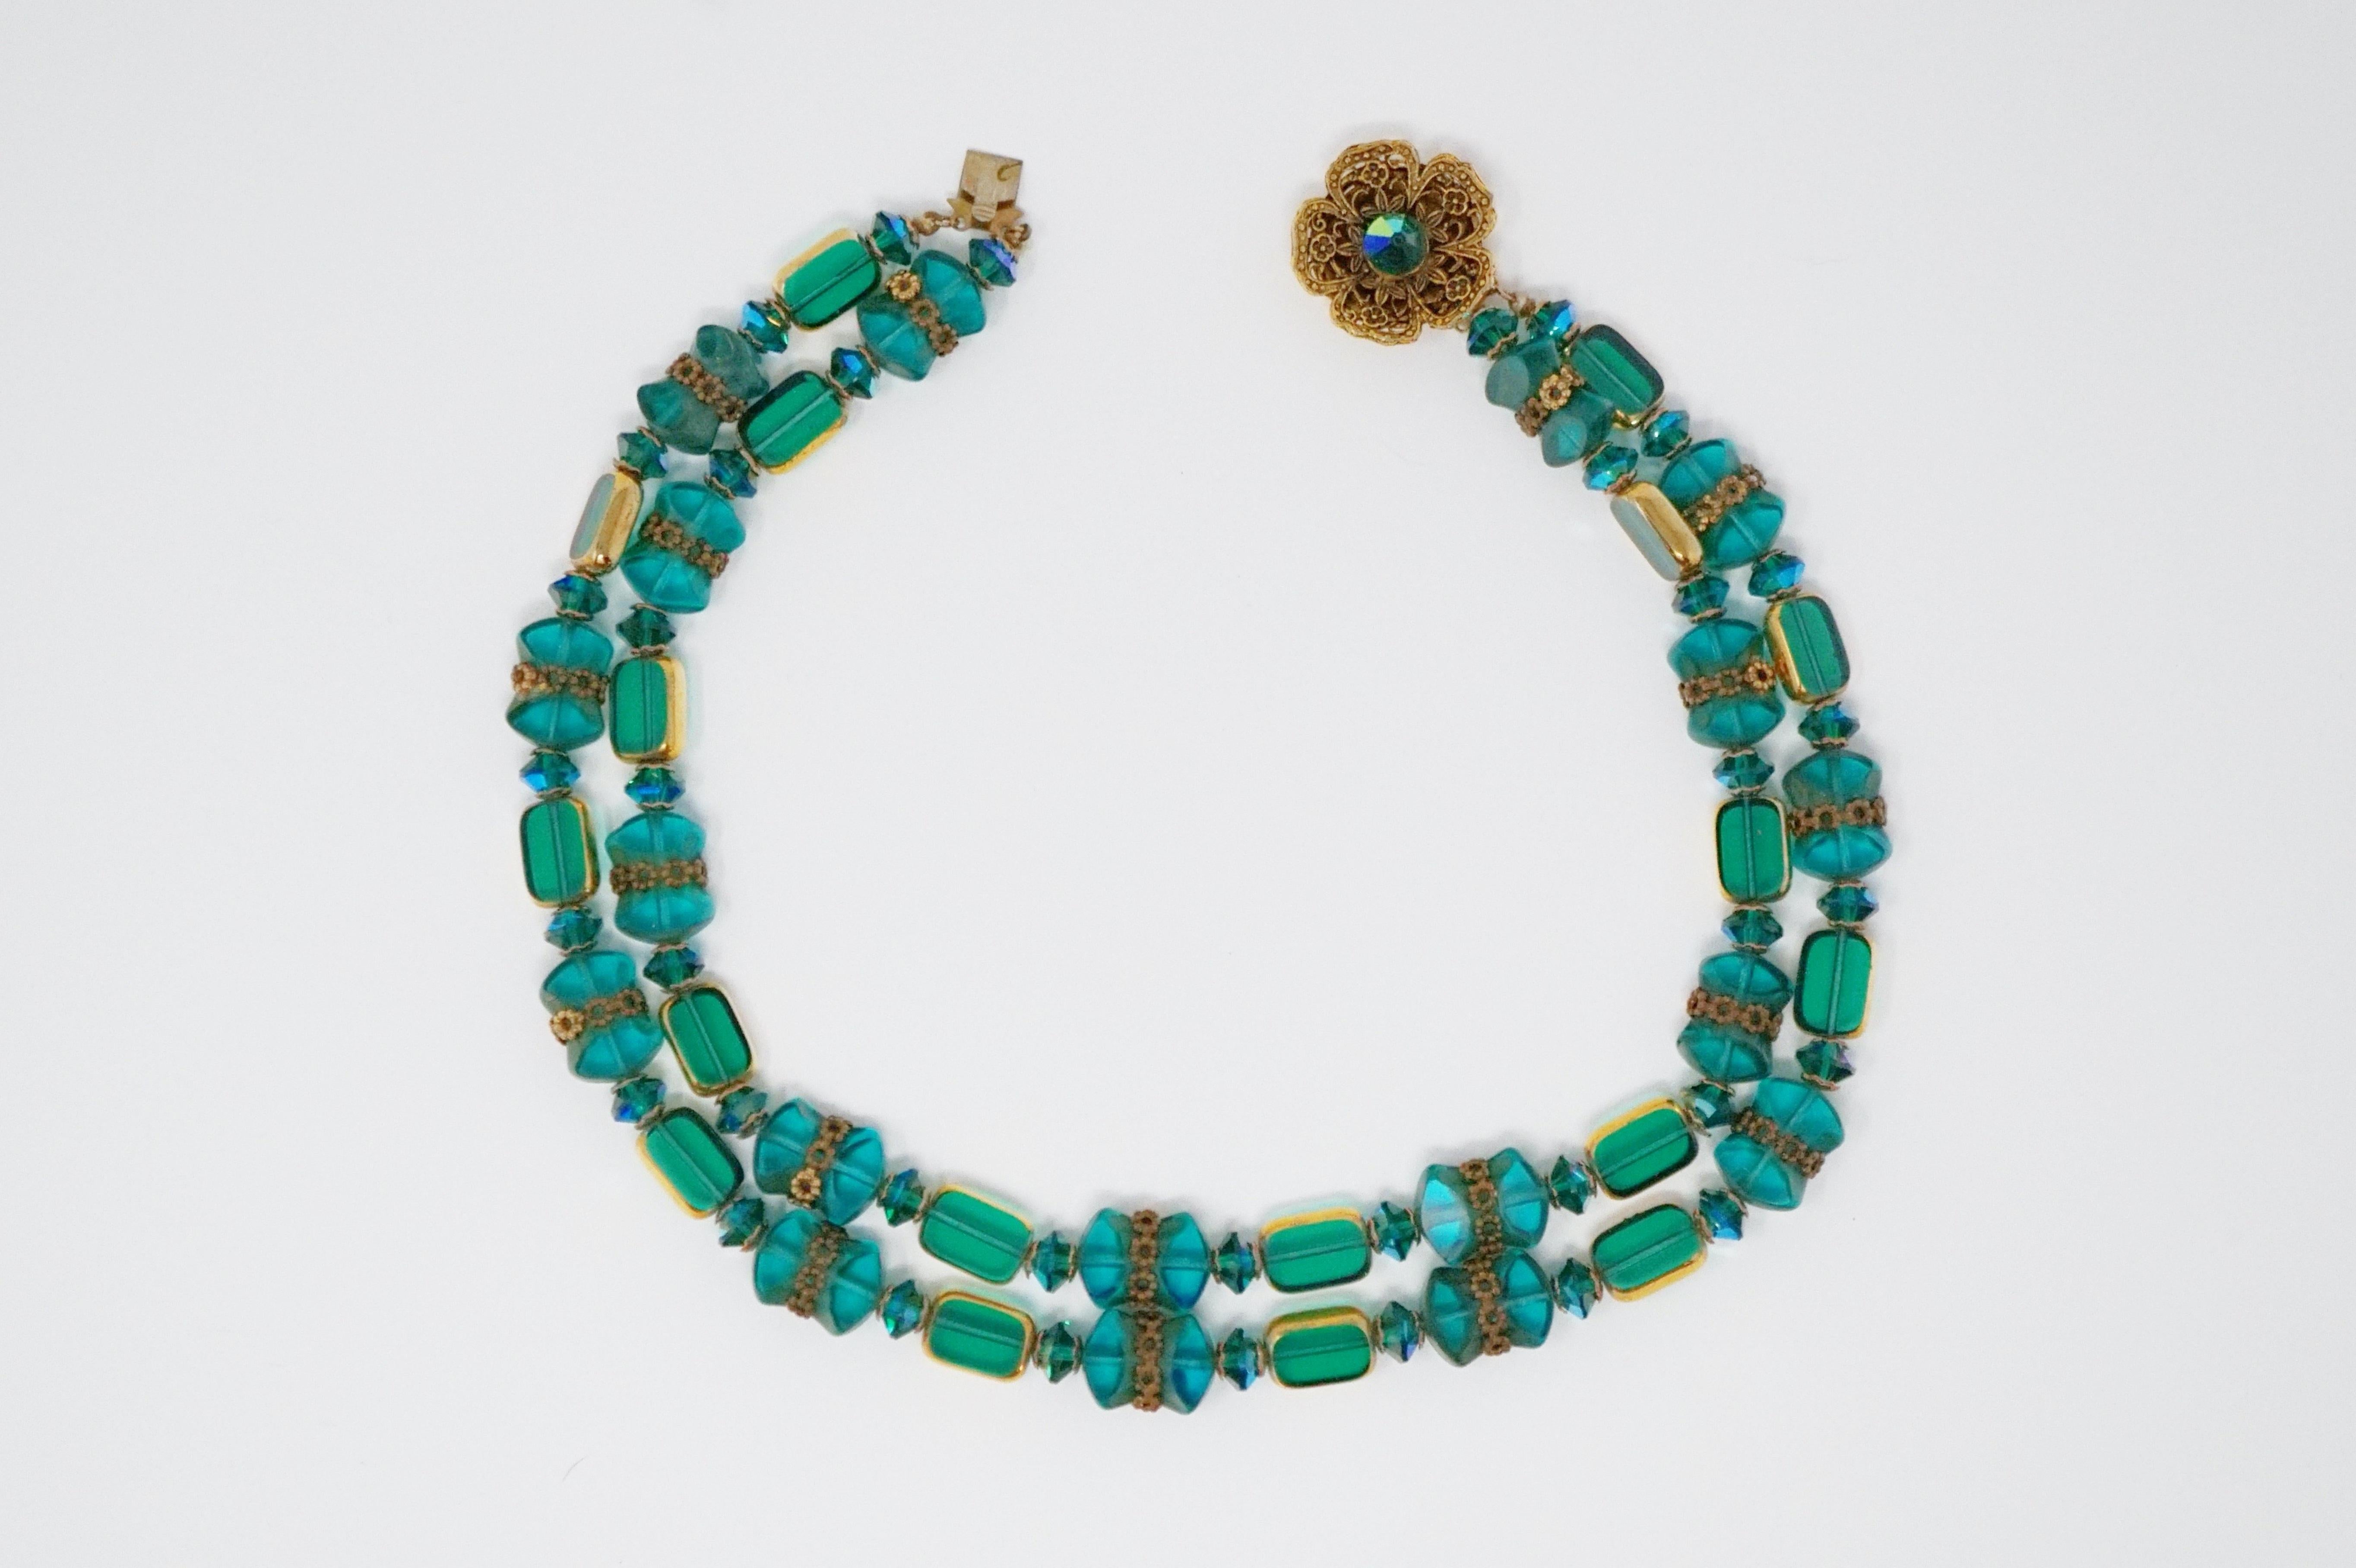 This striking Alice Caviness beaded necklace is made from the most gorgeous shade of peacock green glass and crystal beads with gilded accents and a beautiful flower box clasp that can be worn at the front or back of the necklace. This is a